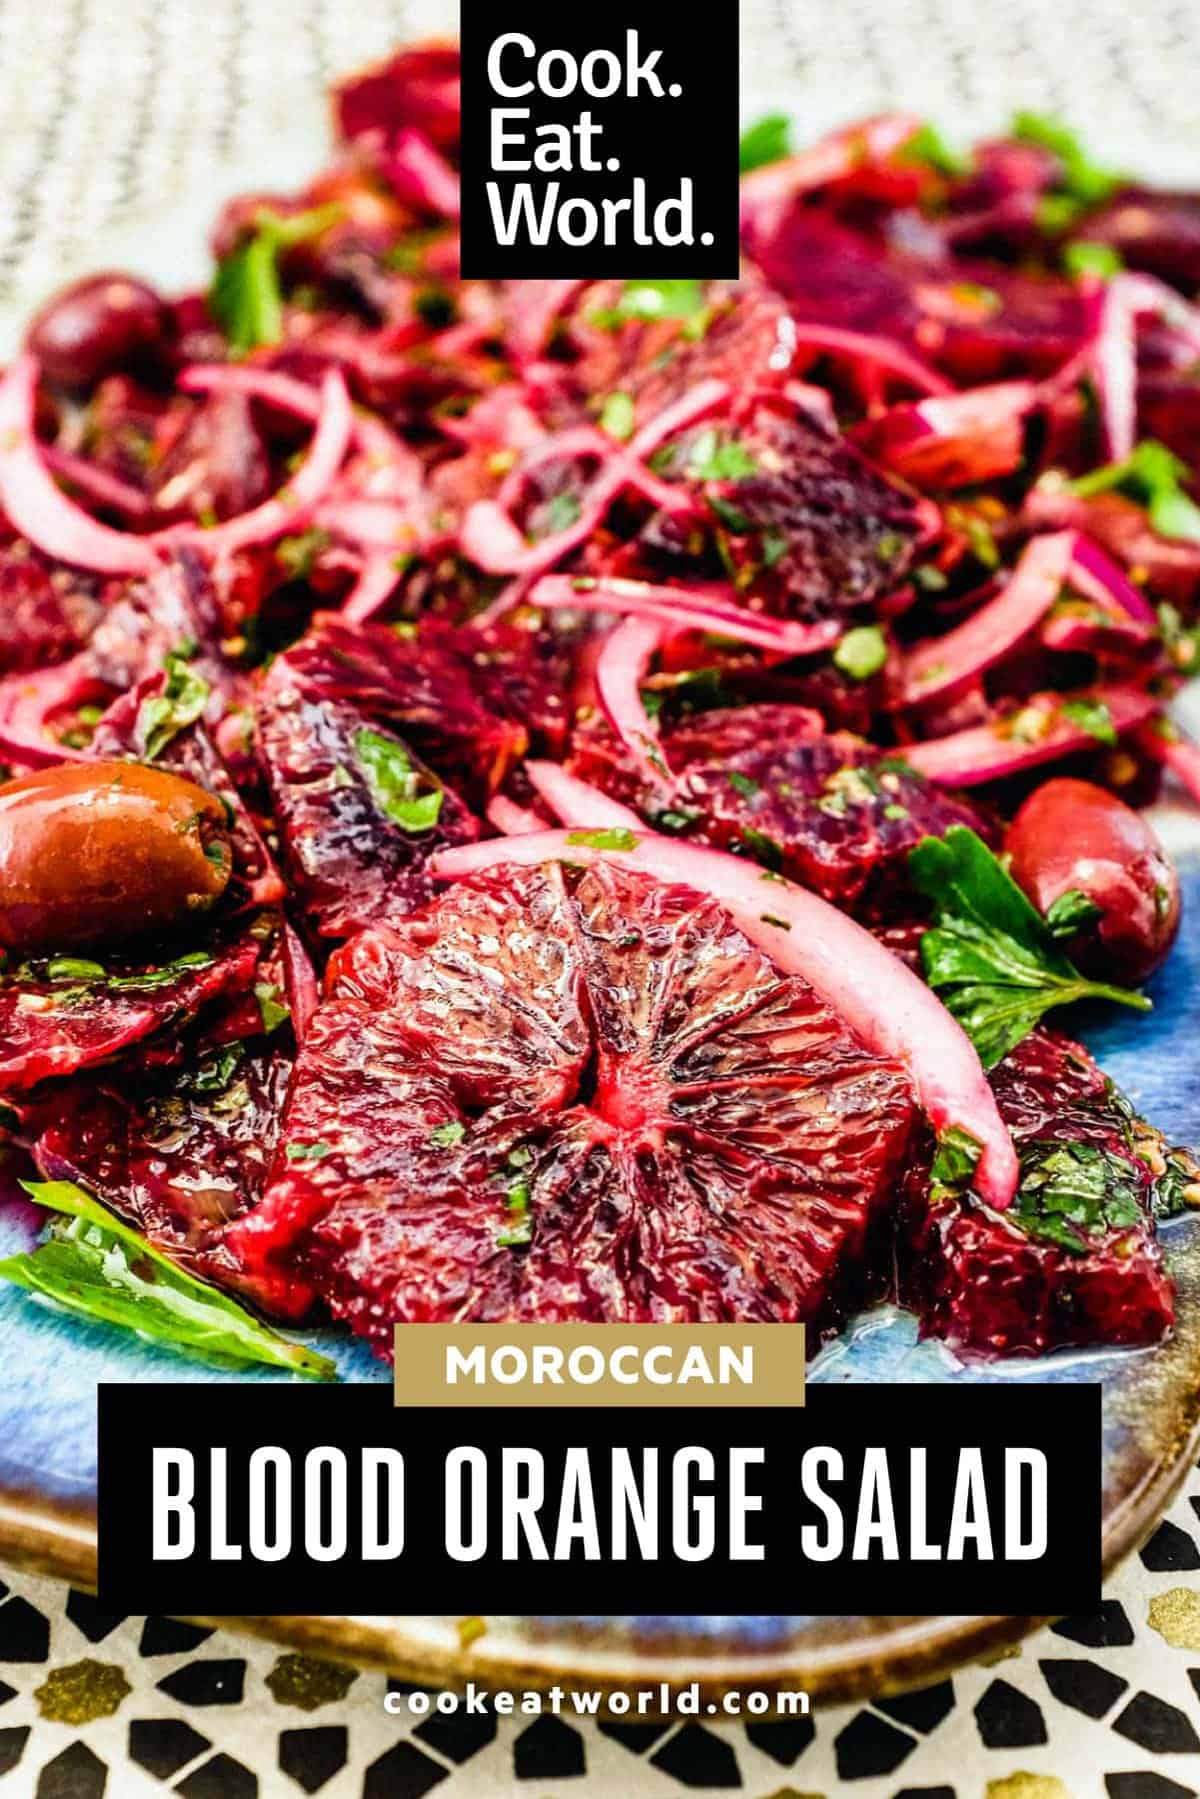 A platter of blood orange salad with black olives, onion and herbs